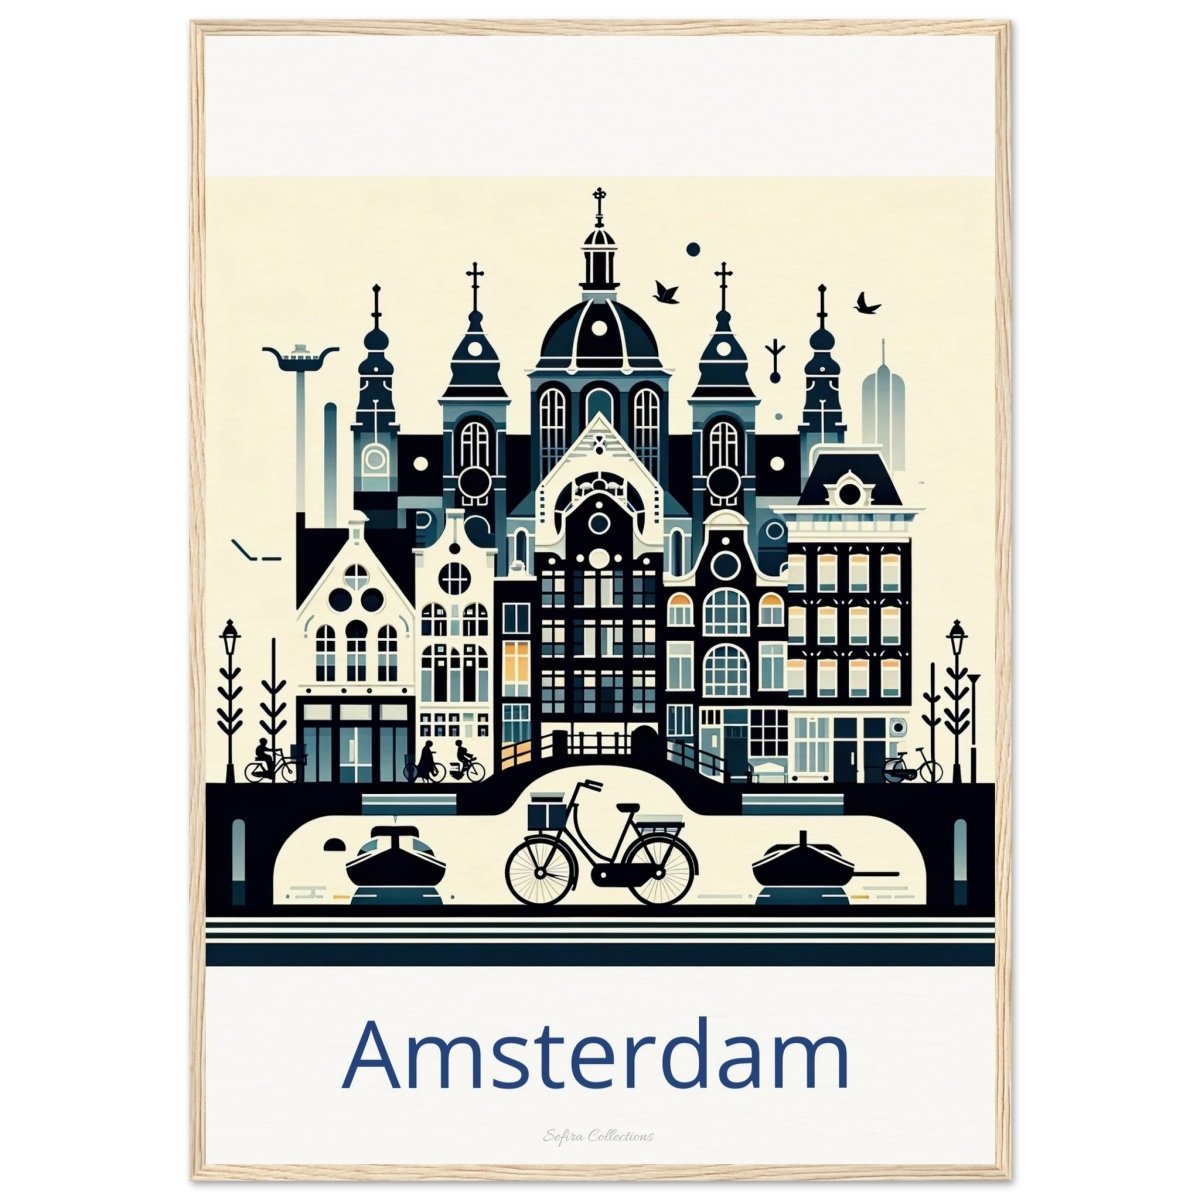 Sefira Amsterdam Art Travel Museum-Quality Matte Paper Wooden Framed Poster | Sefira Art Gallery - Print Material - Sefira Collections